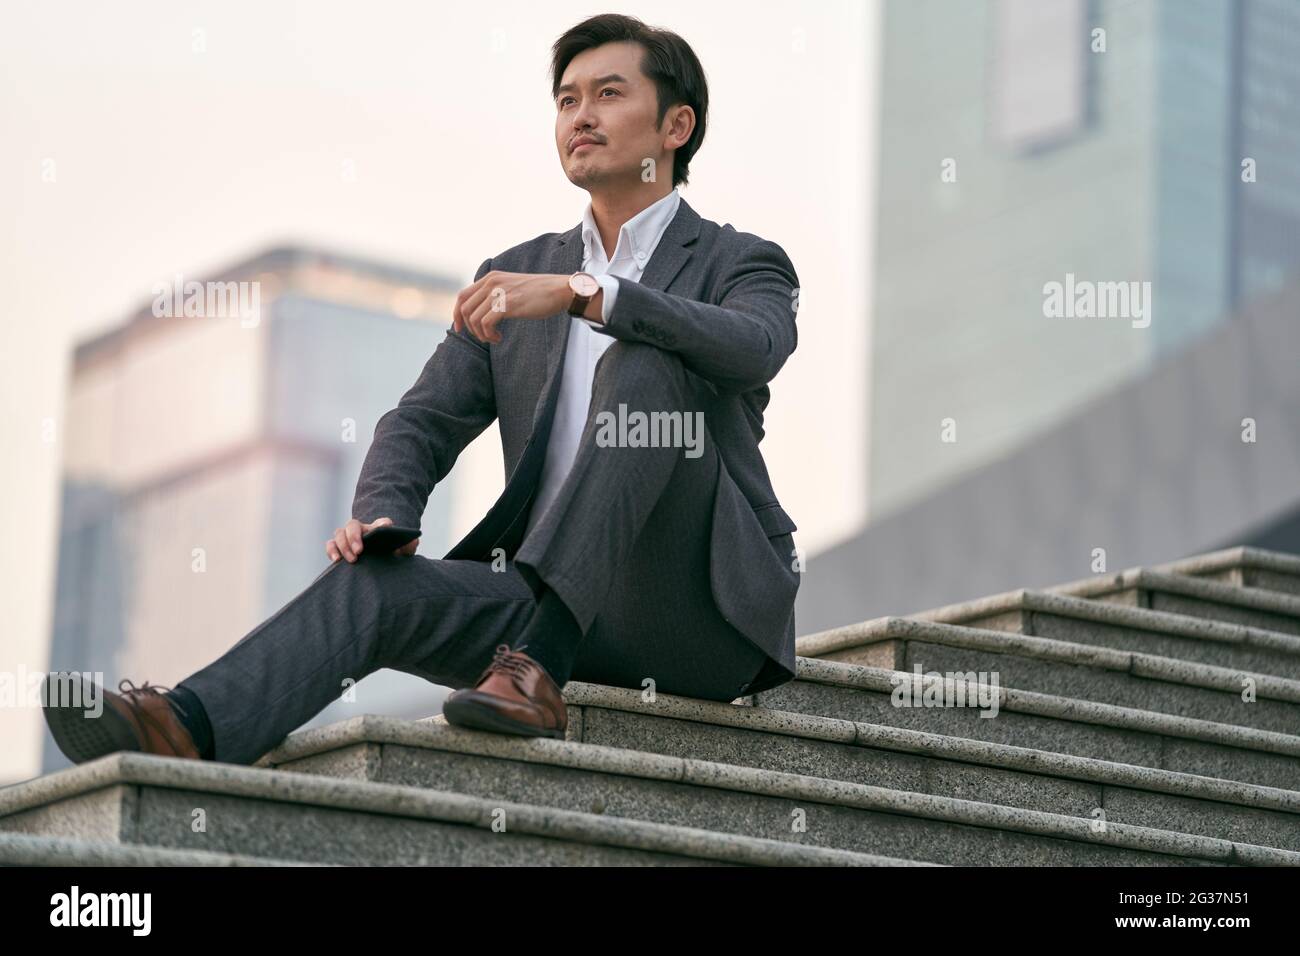 outdoor portrait of a successful asian business man sitting on steps in full suit Stock Photo